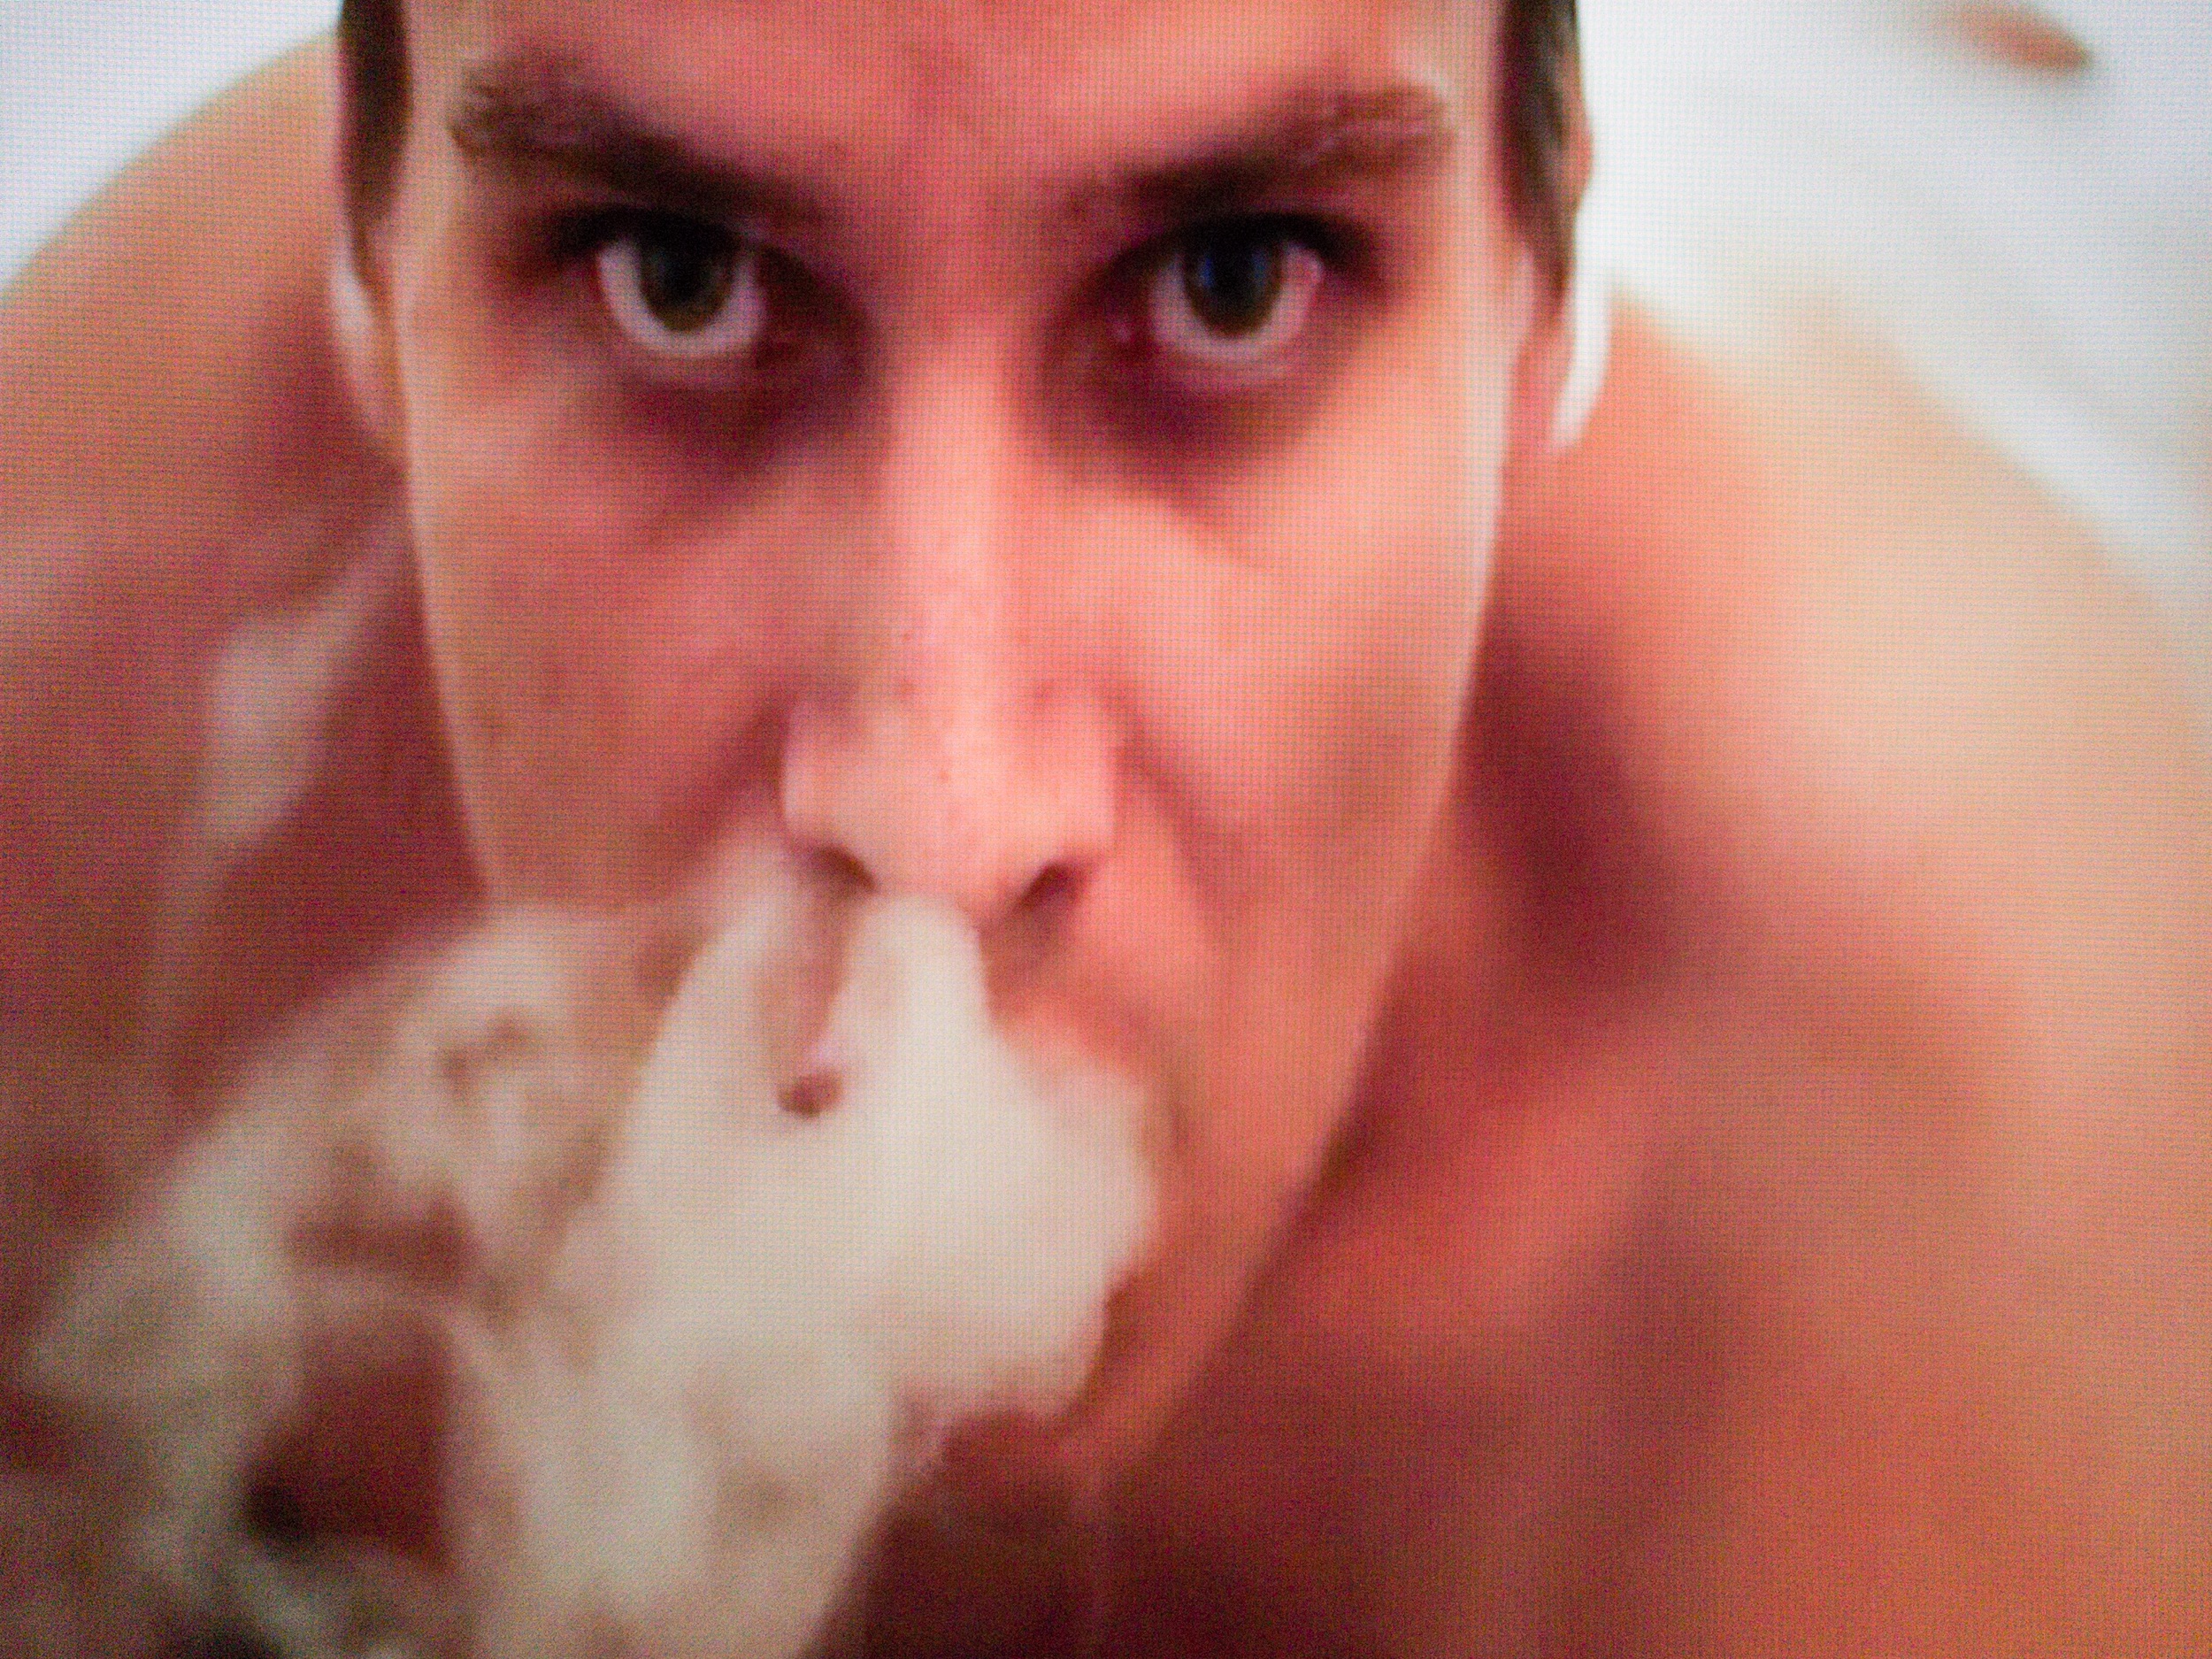 A fat, naked, young man lies on his stomach and looks directly at the camera, taking up the entire frame. He is exhaling smoke, which is drifting downward and covering his mouth and chin.